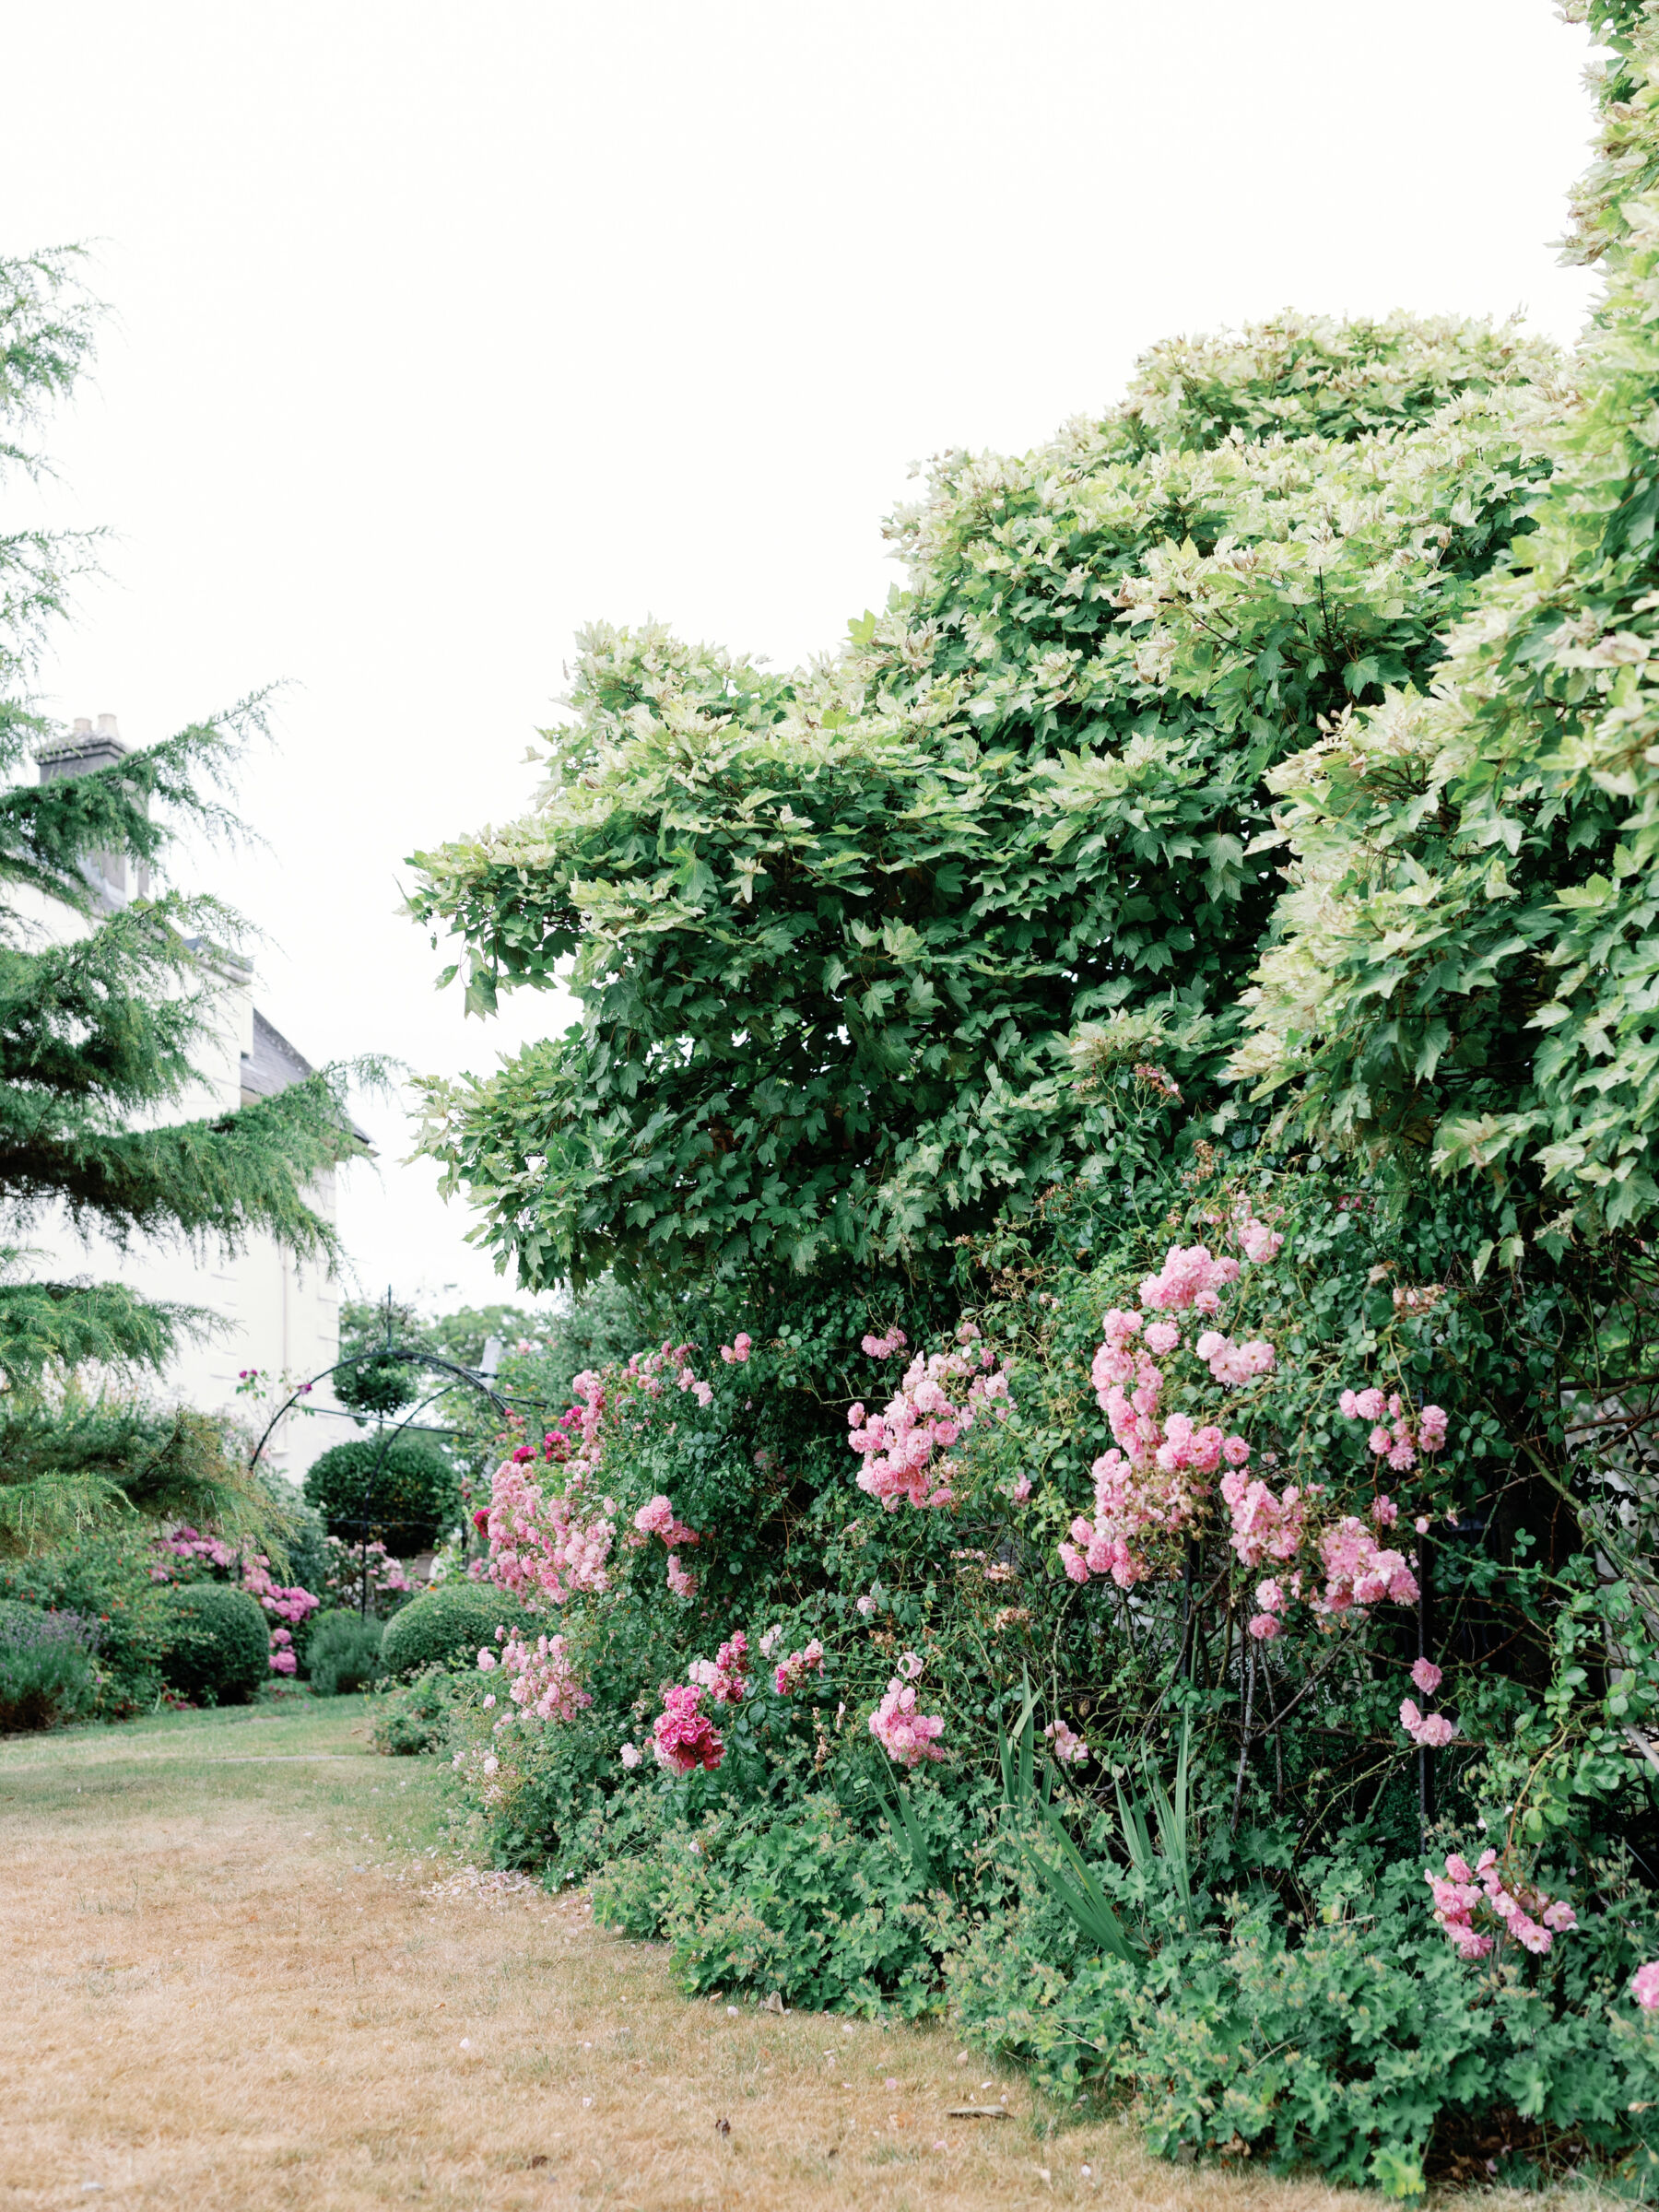 Bushes with pink flowers